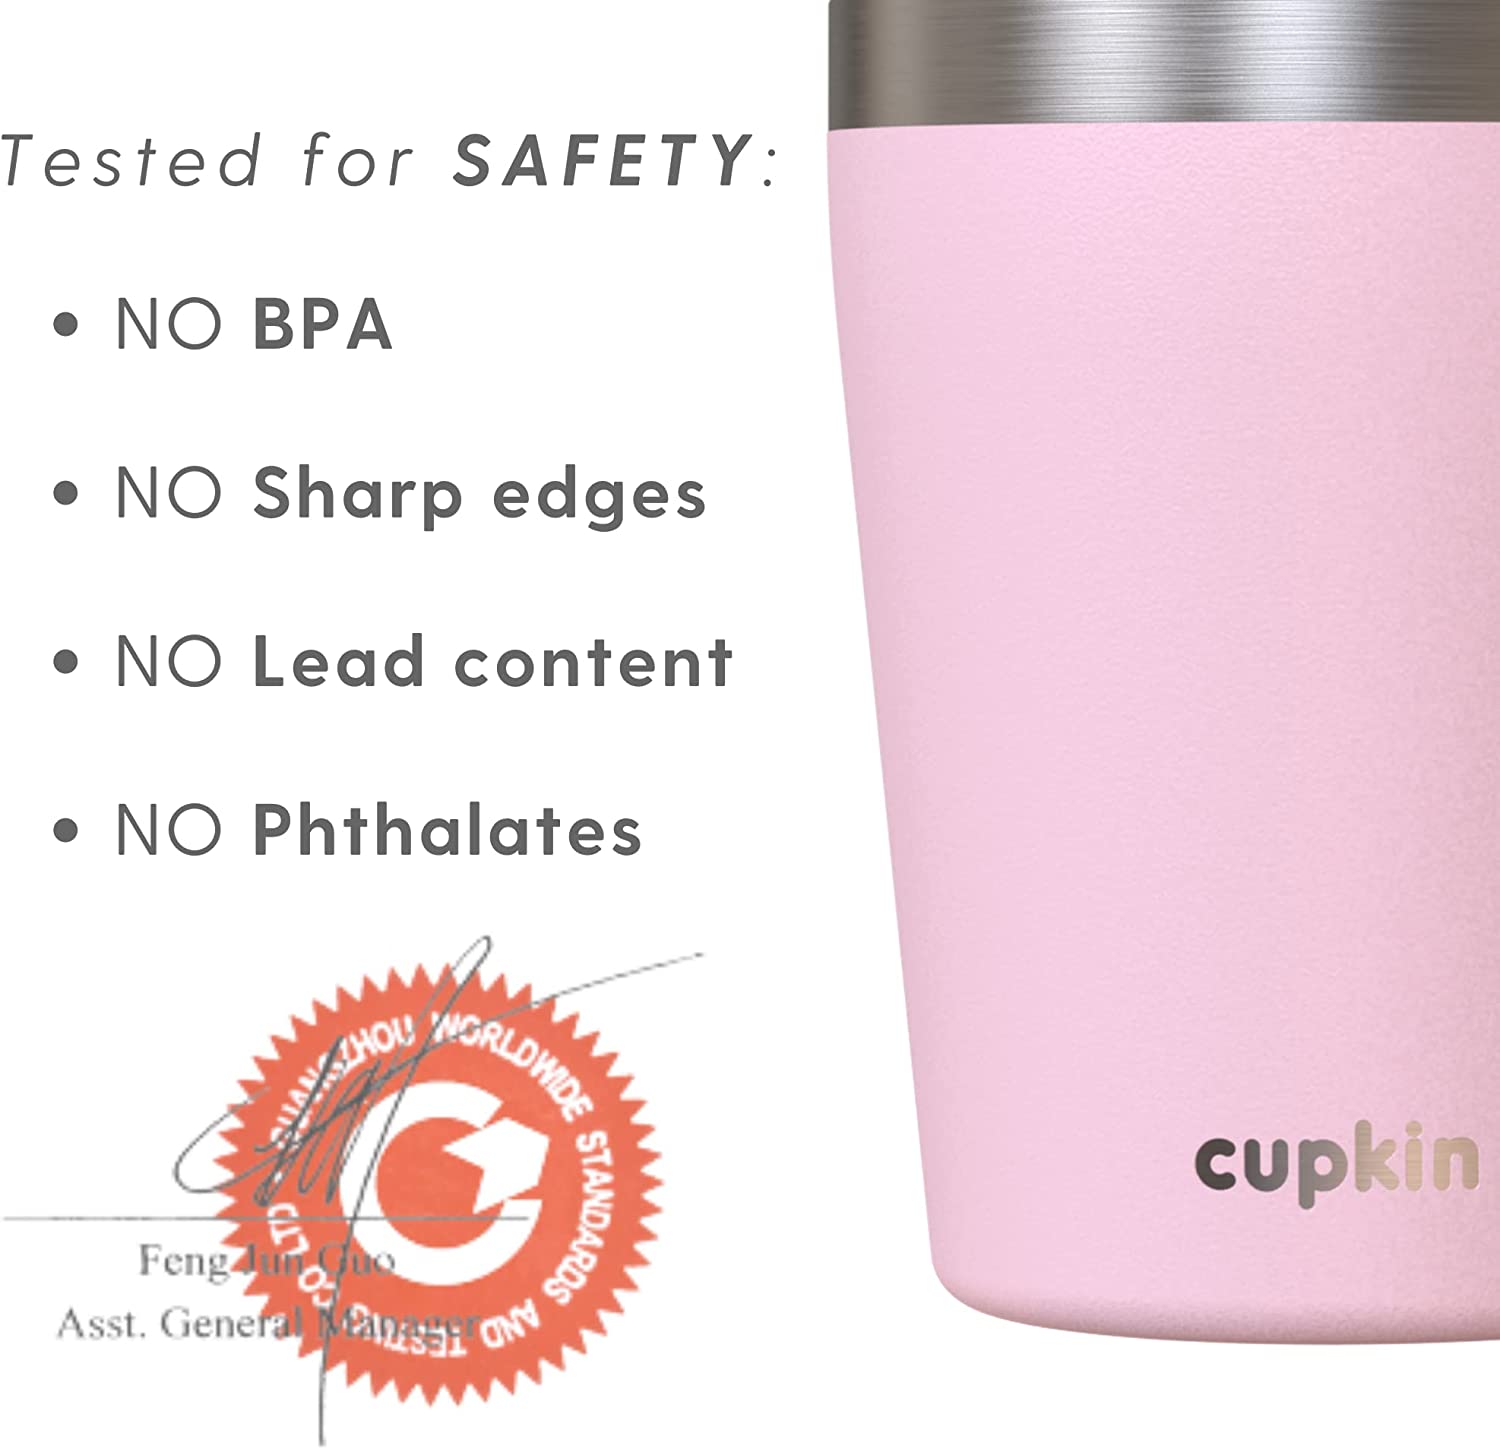 Cupkin's corporate philosophy includes mistakes happen — guess so! Lead- free kids cup tests positive for unsafe (& illegal) levels of Lead